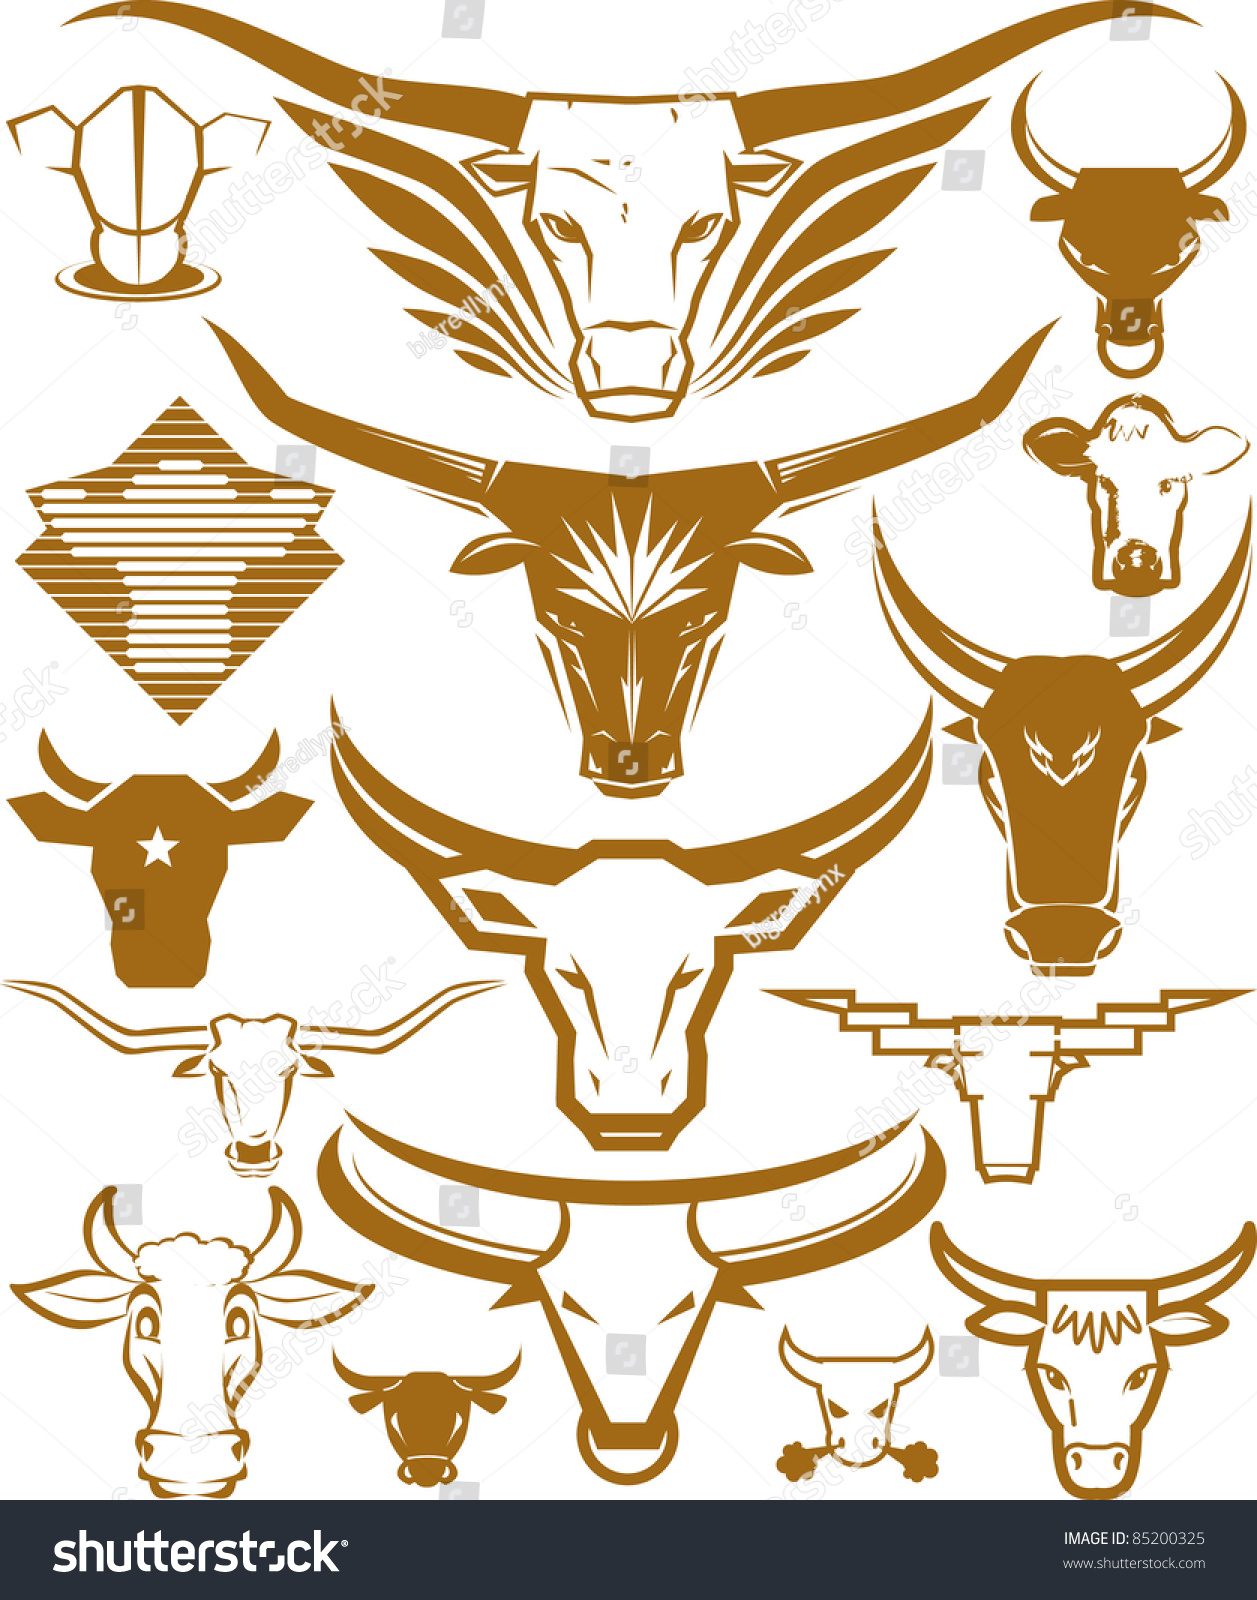 Cow Head Collection Stock Vector 85200325 - Shutterstock